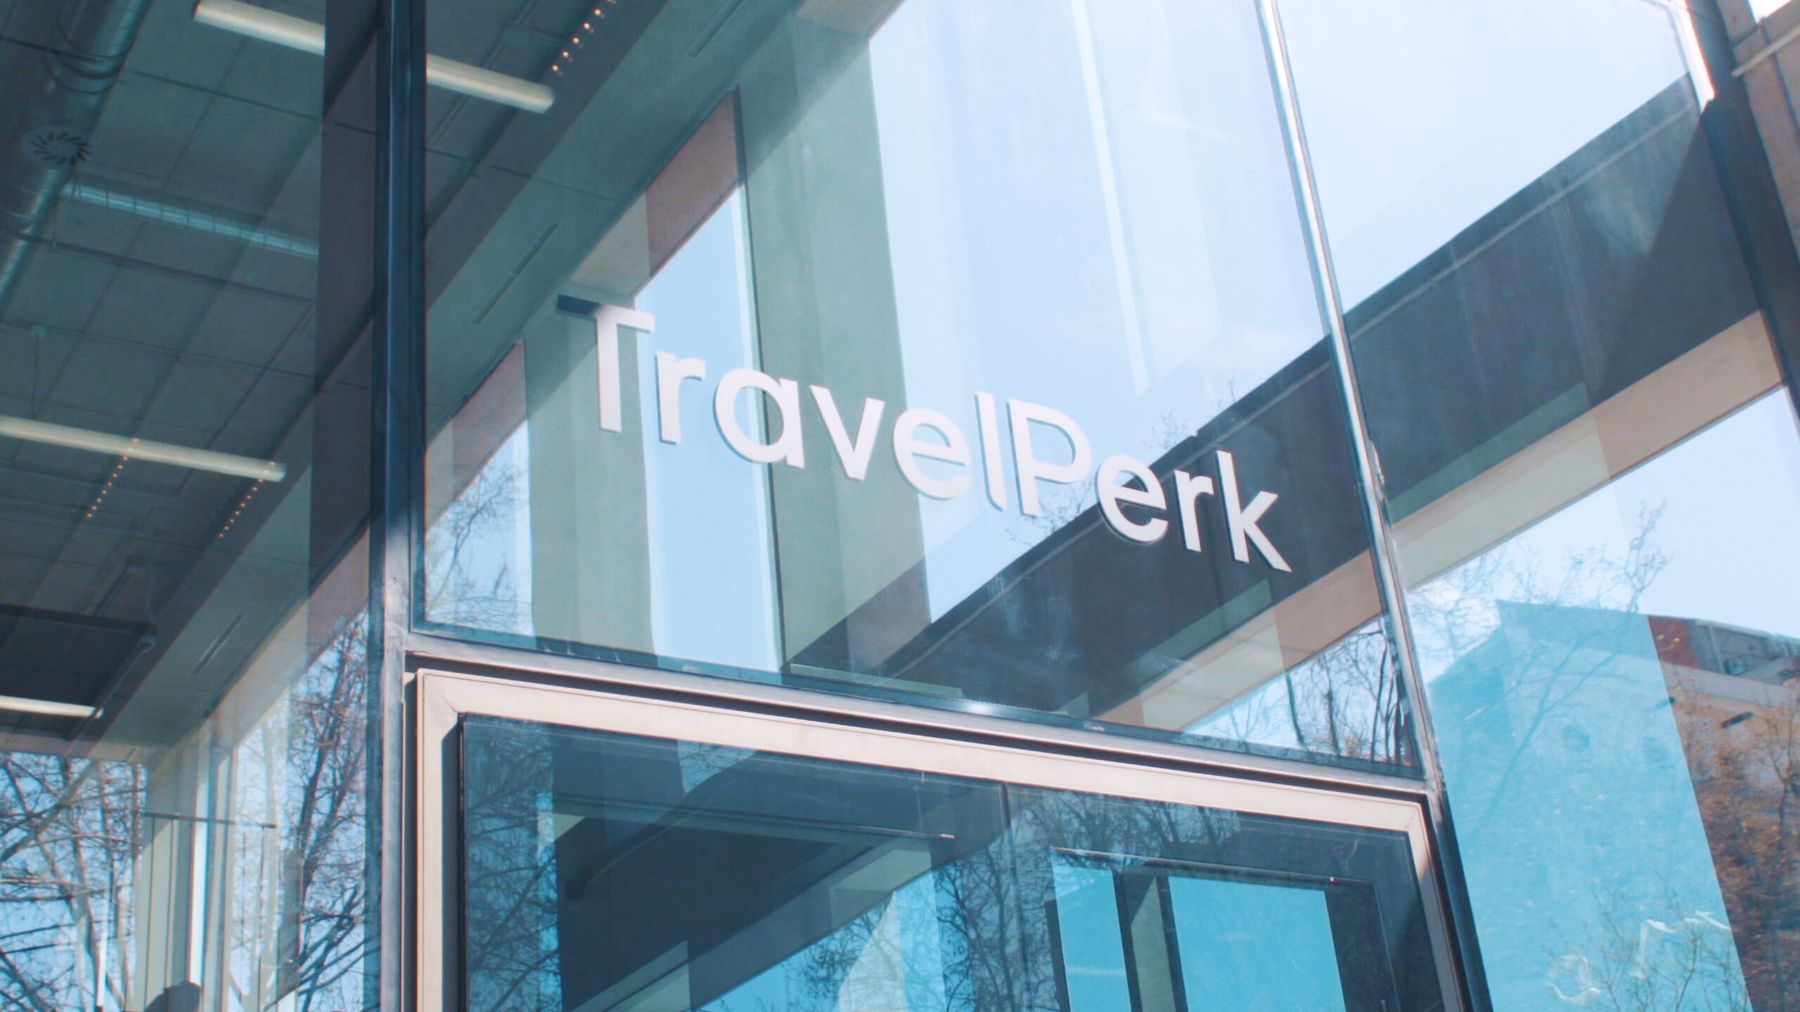 23-facts-about-travelperk